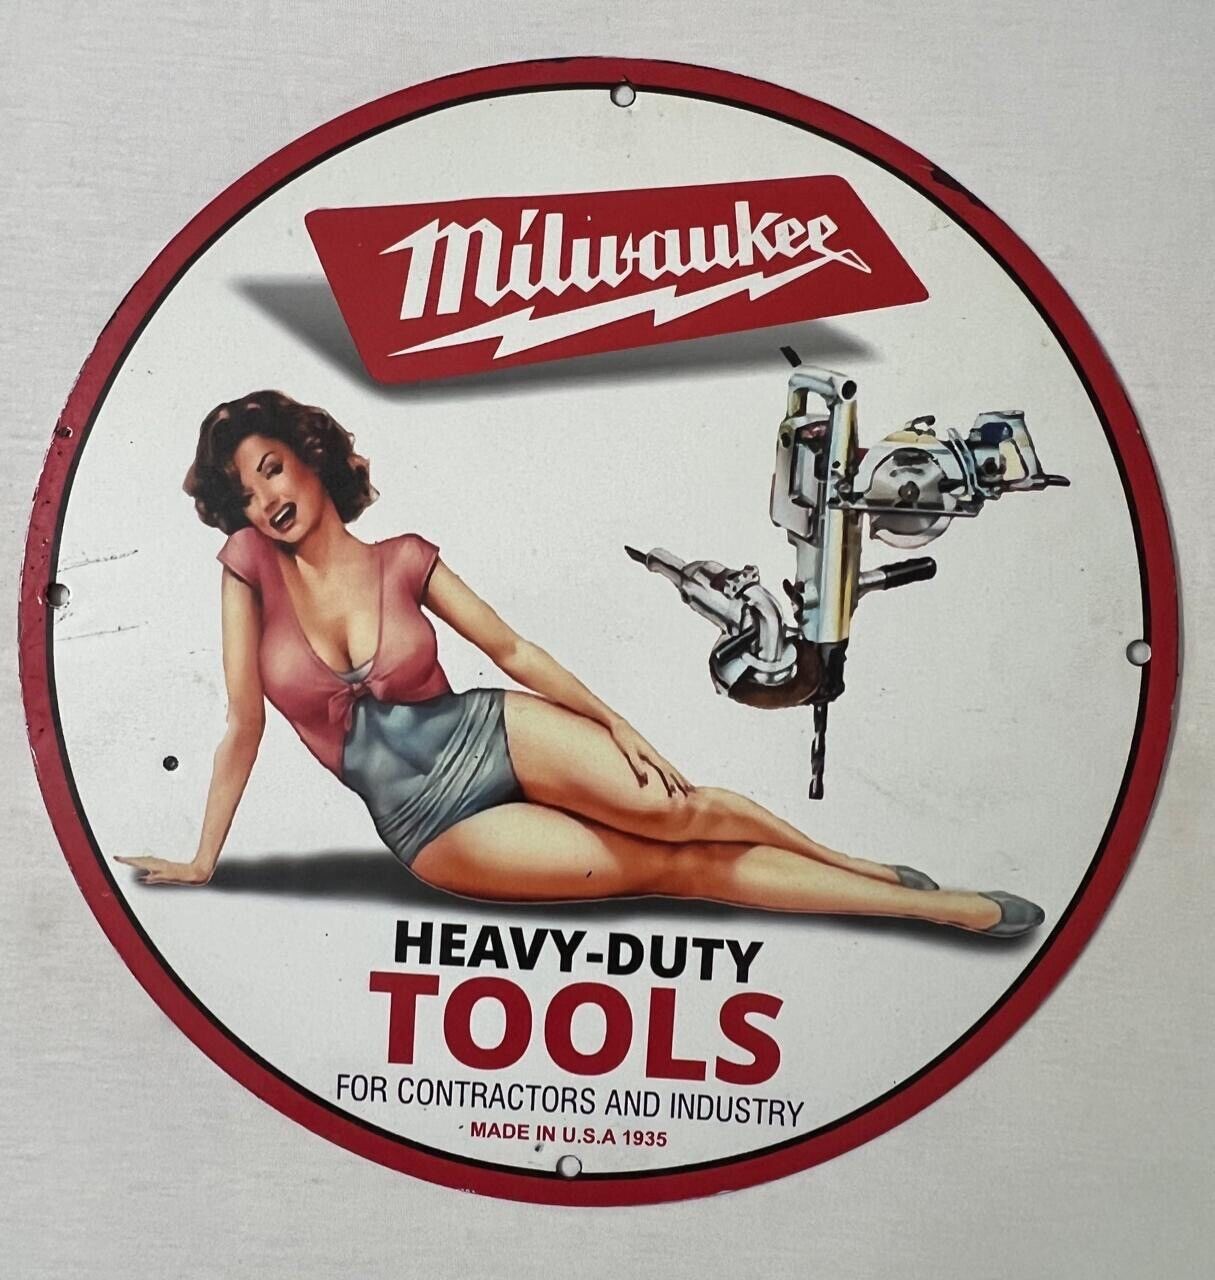 CLASSIC MILWAUKEE HEAVY DUTY TOOLS Pinup Porcelain Enamel Sign.